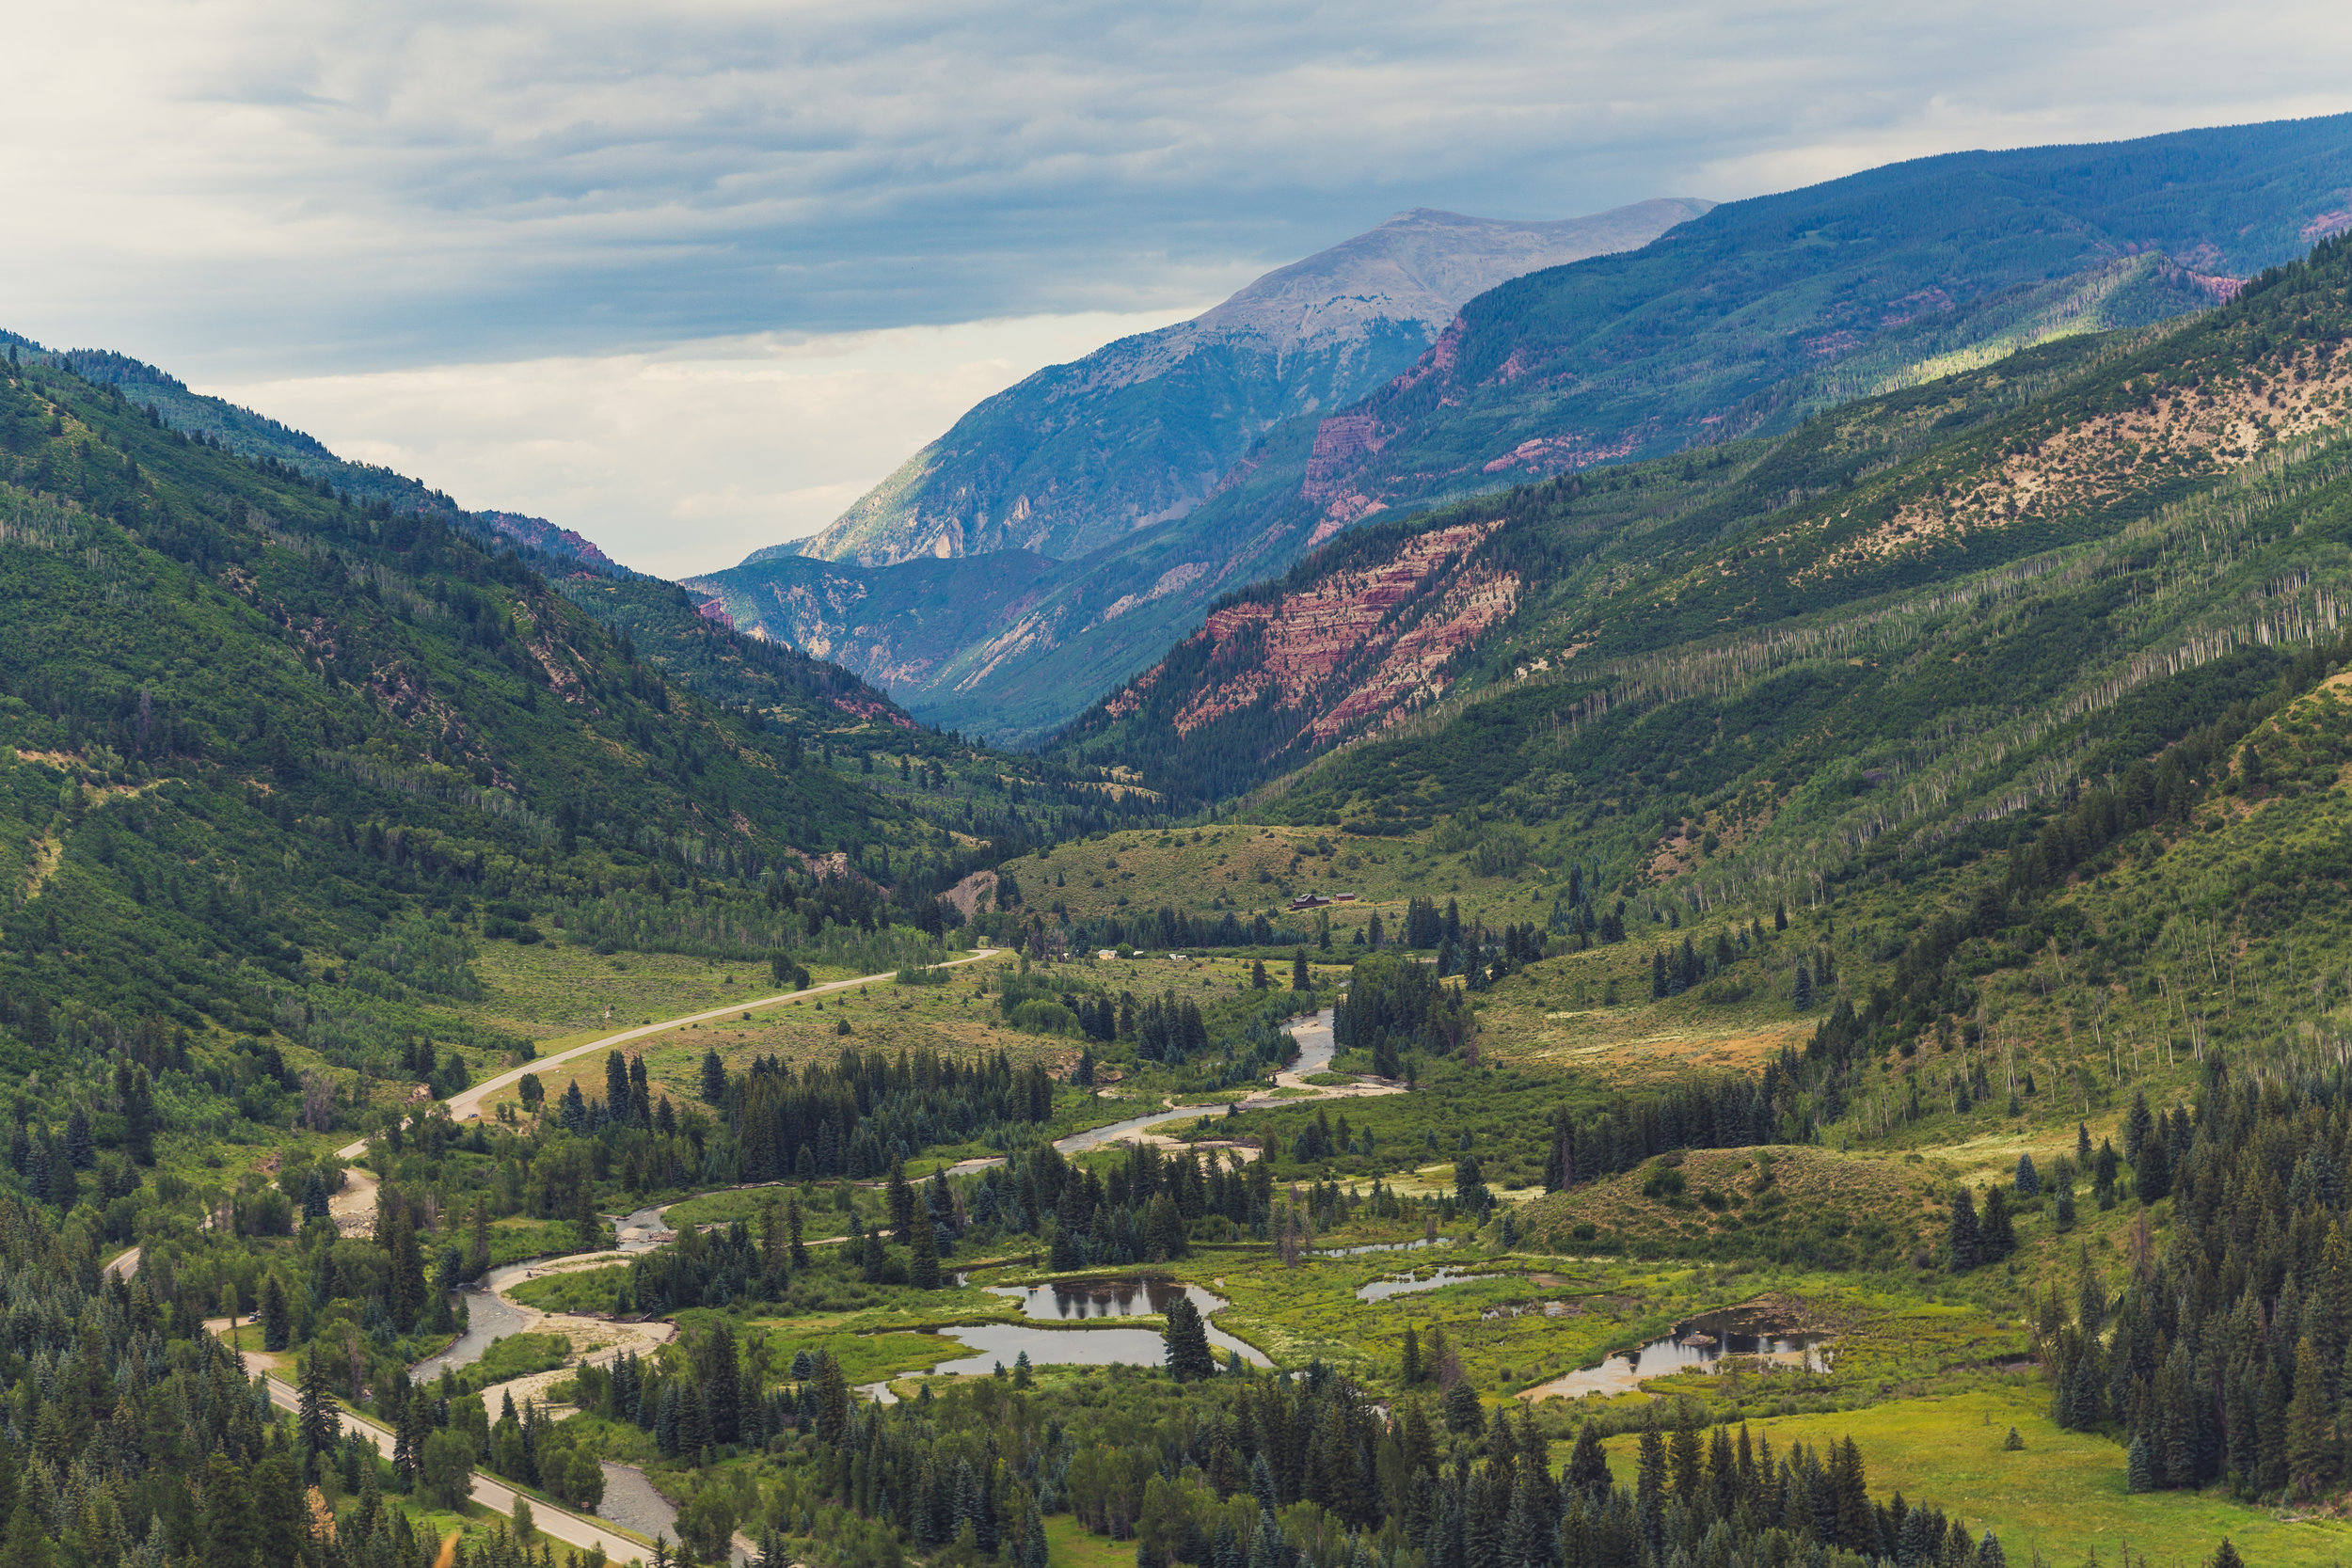 Protect Uncompahgre & Gunnison National Outdoor Alliance